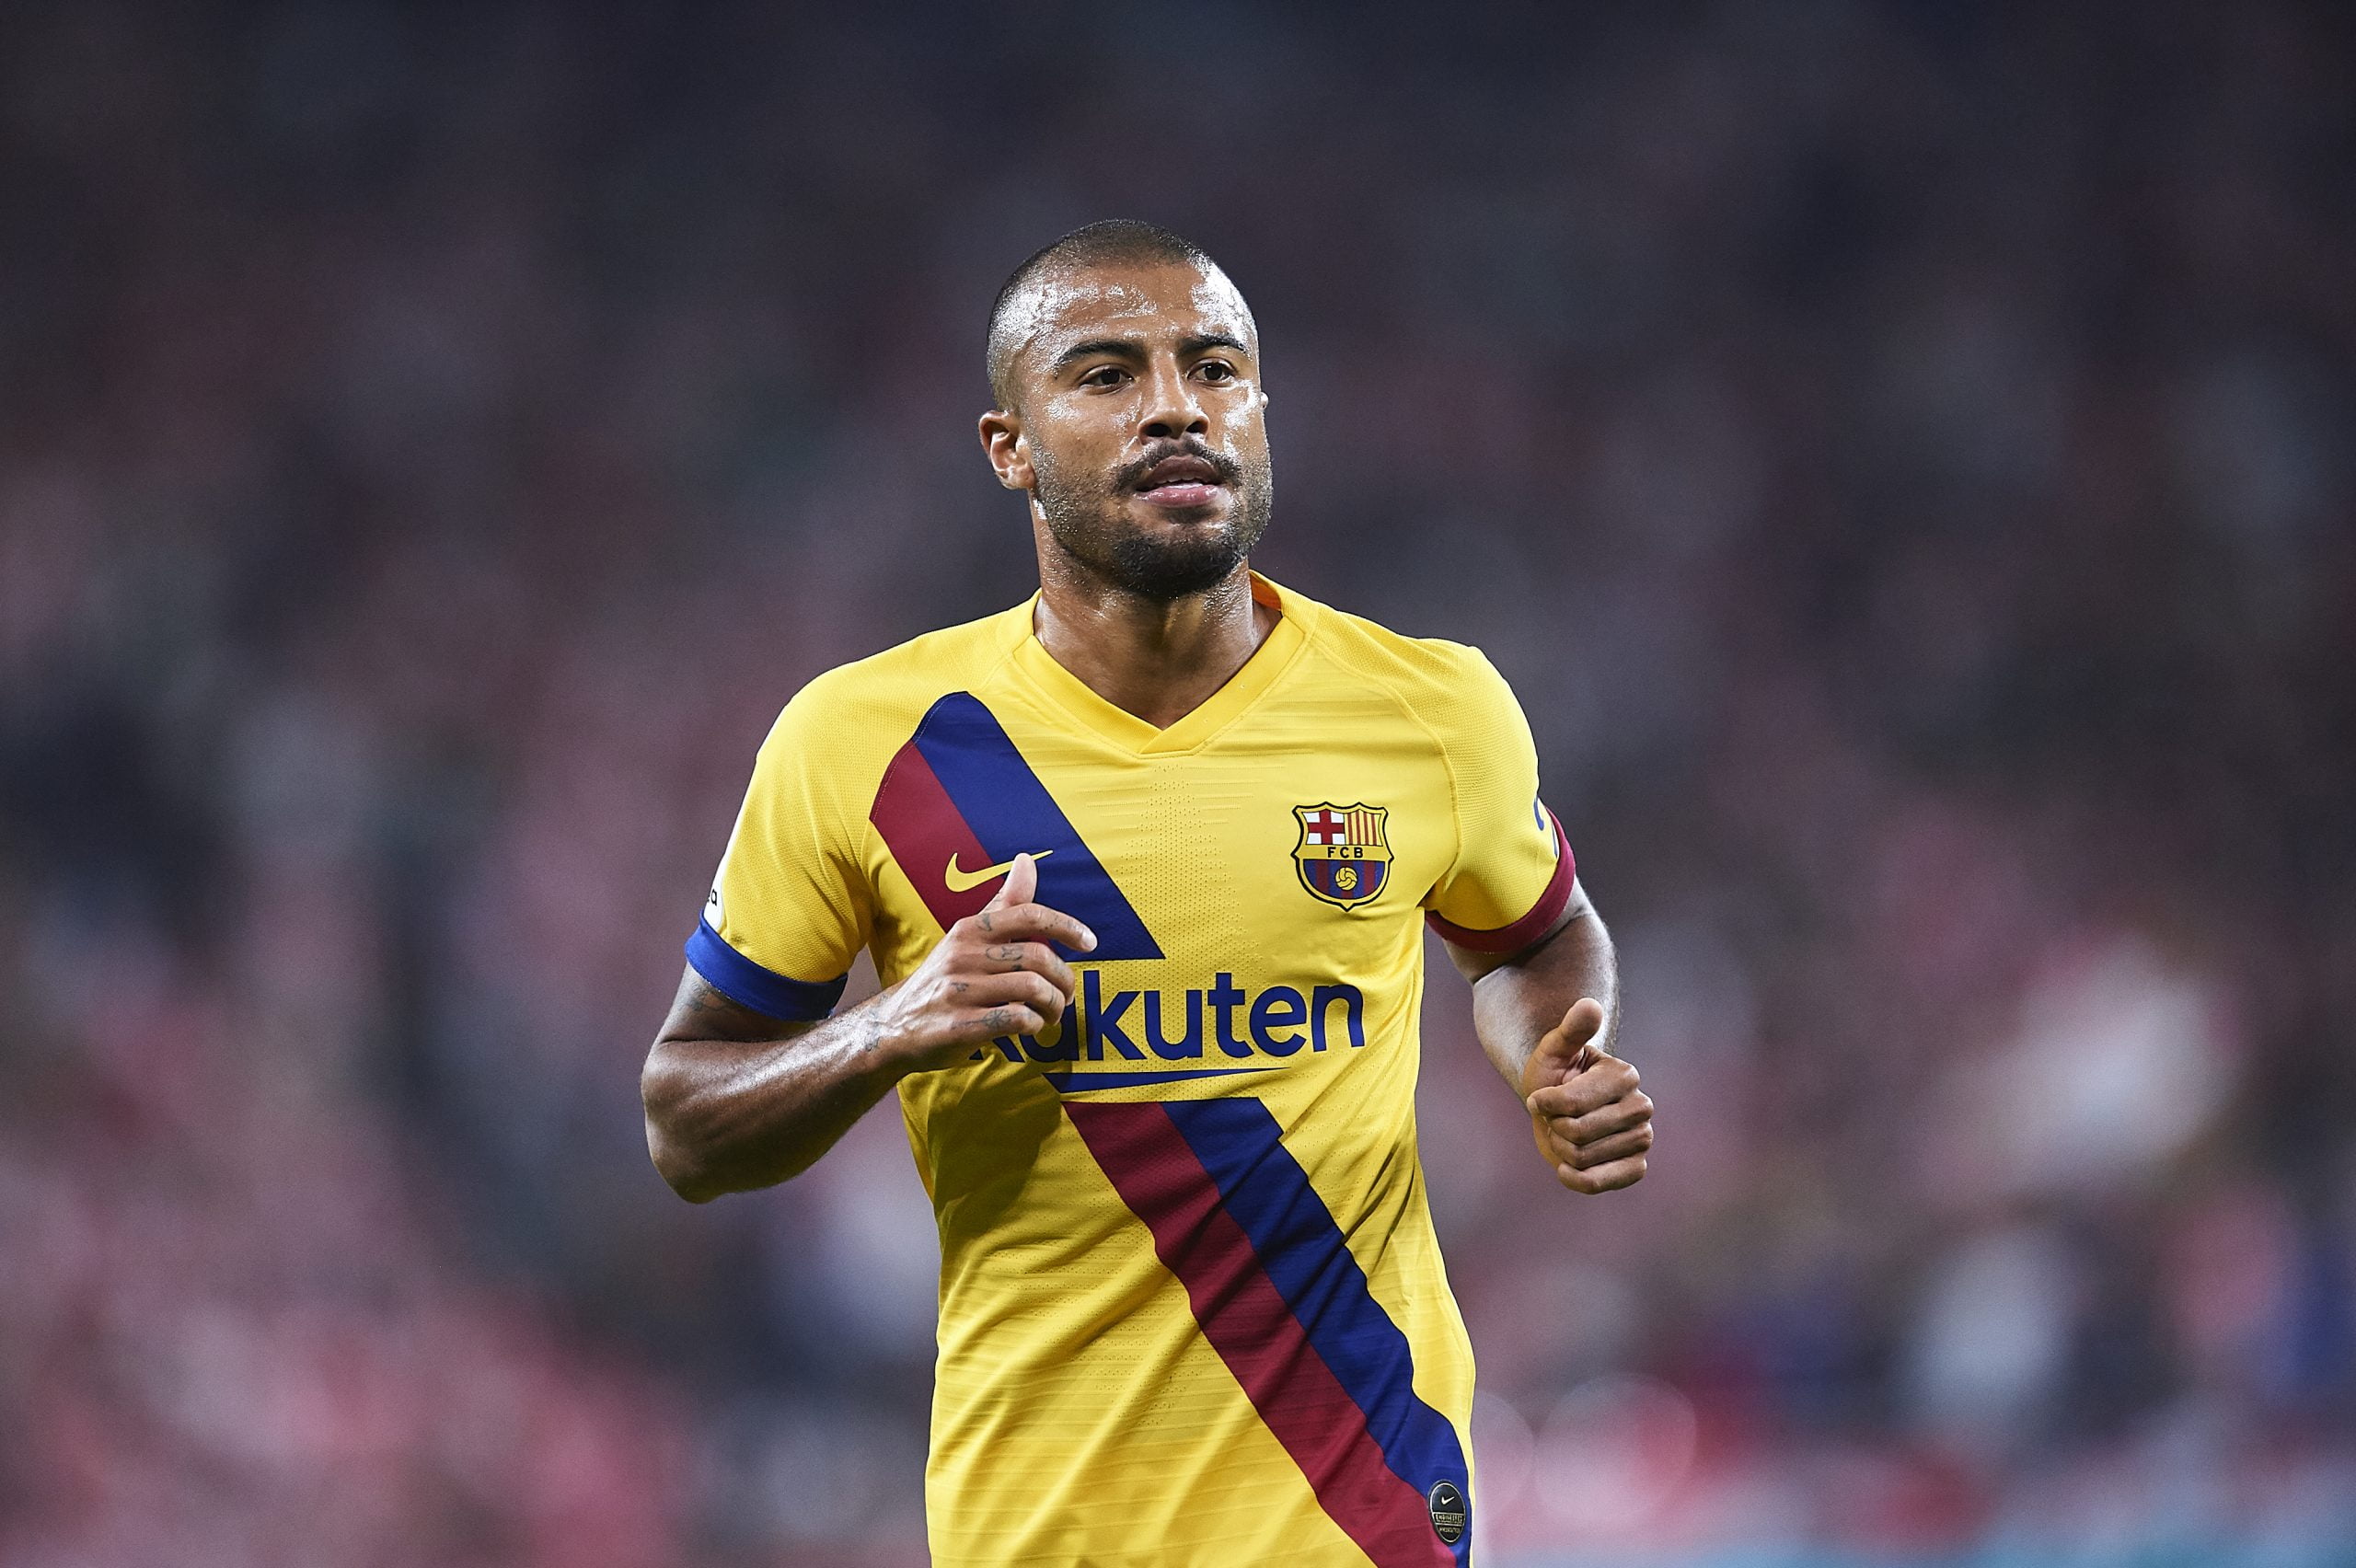 BILBAO, SPAIN - AUGUST 16: Rafinha Alcantara of FC Barcelona looks on during the Liga match between Athletic Club and FC Barcelona at San Mames Stadium on August 16, 2019 in Bilbao, Spain. (Photo by Juan Manuel Serrano Arce/Getty Images)